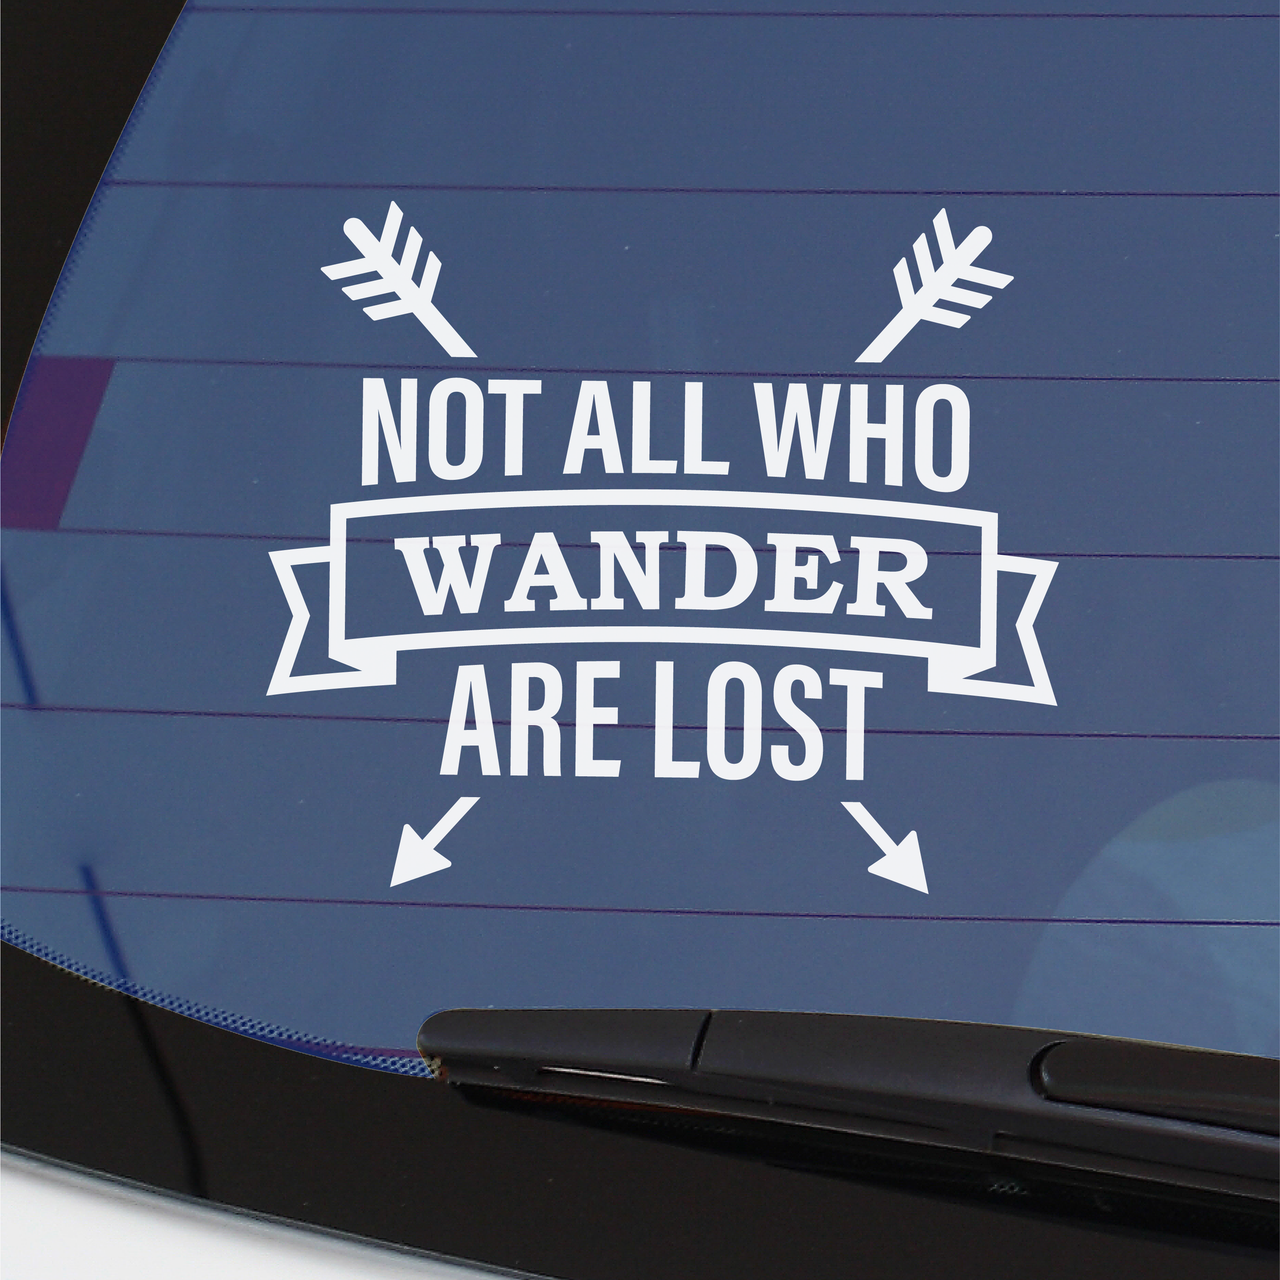 Not All Who Wander Are Lost - Car Decal